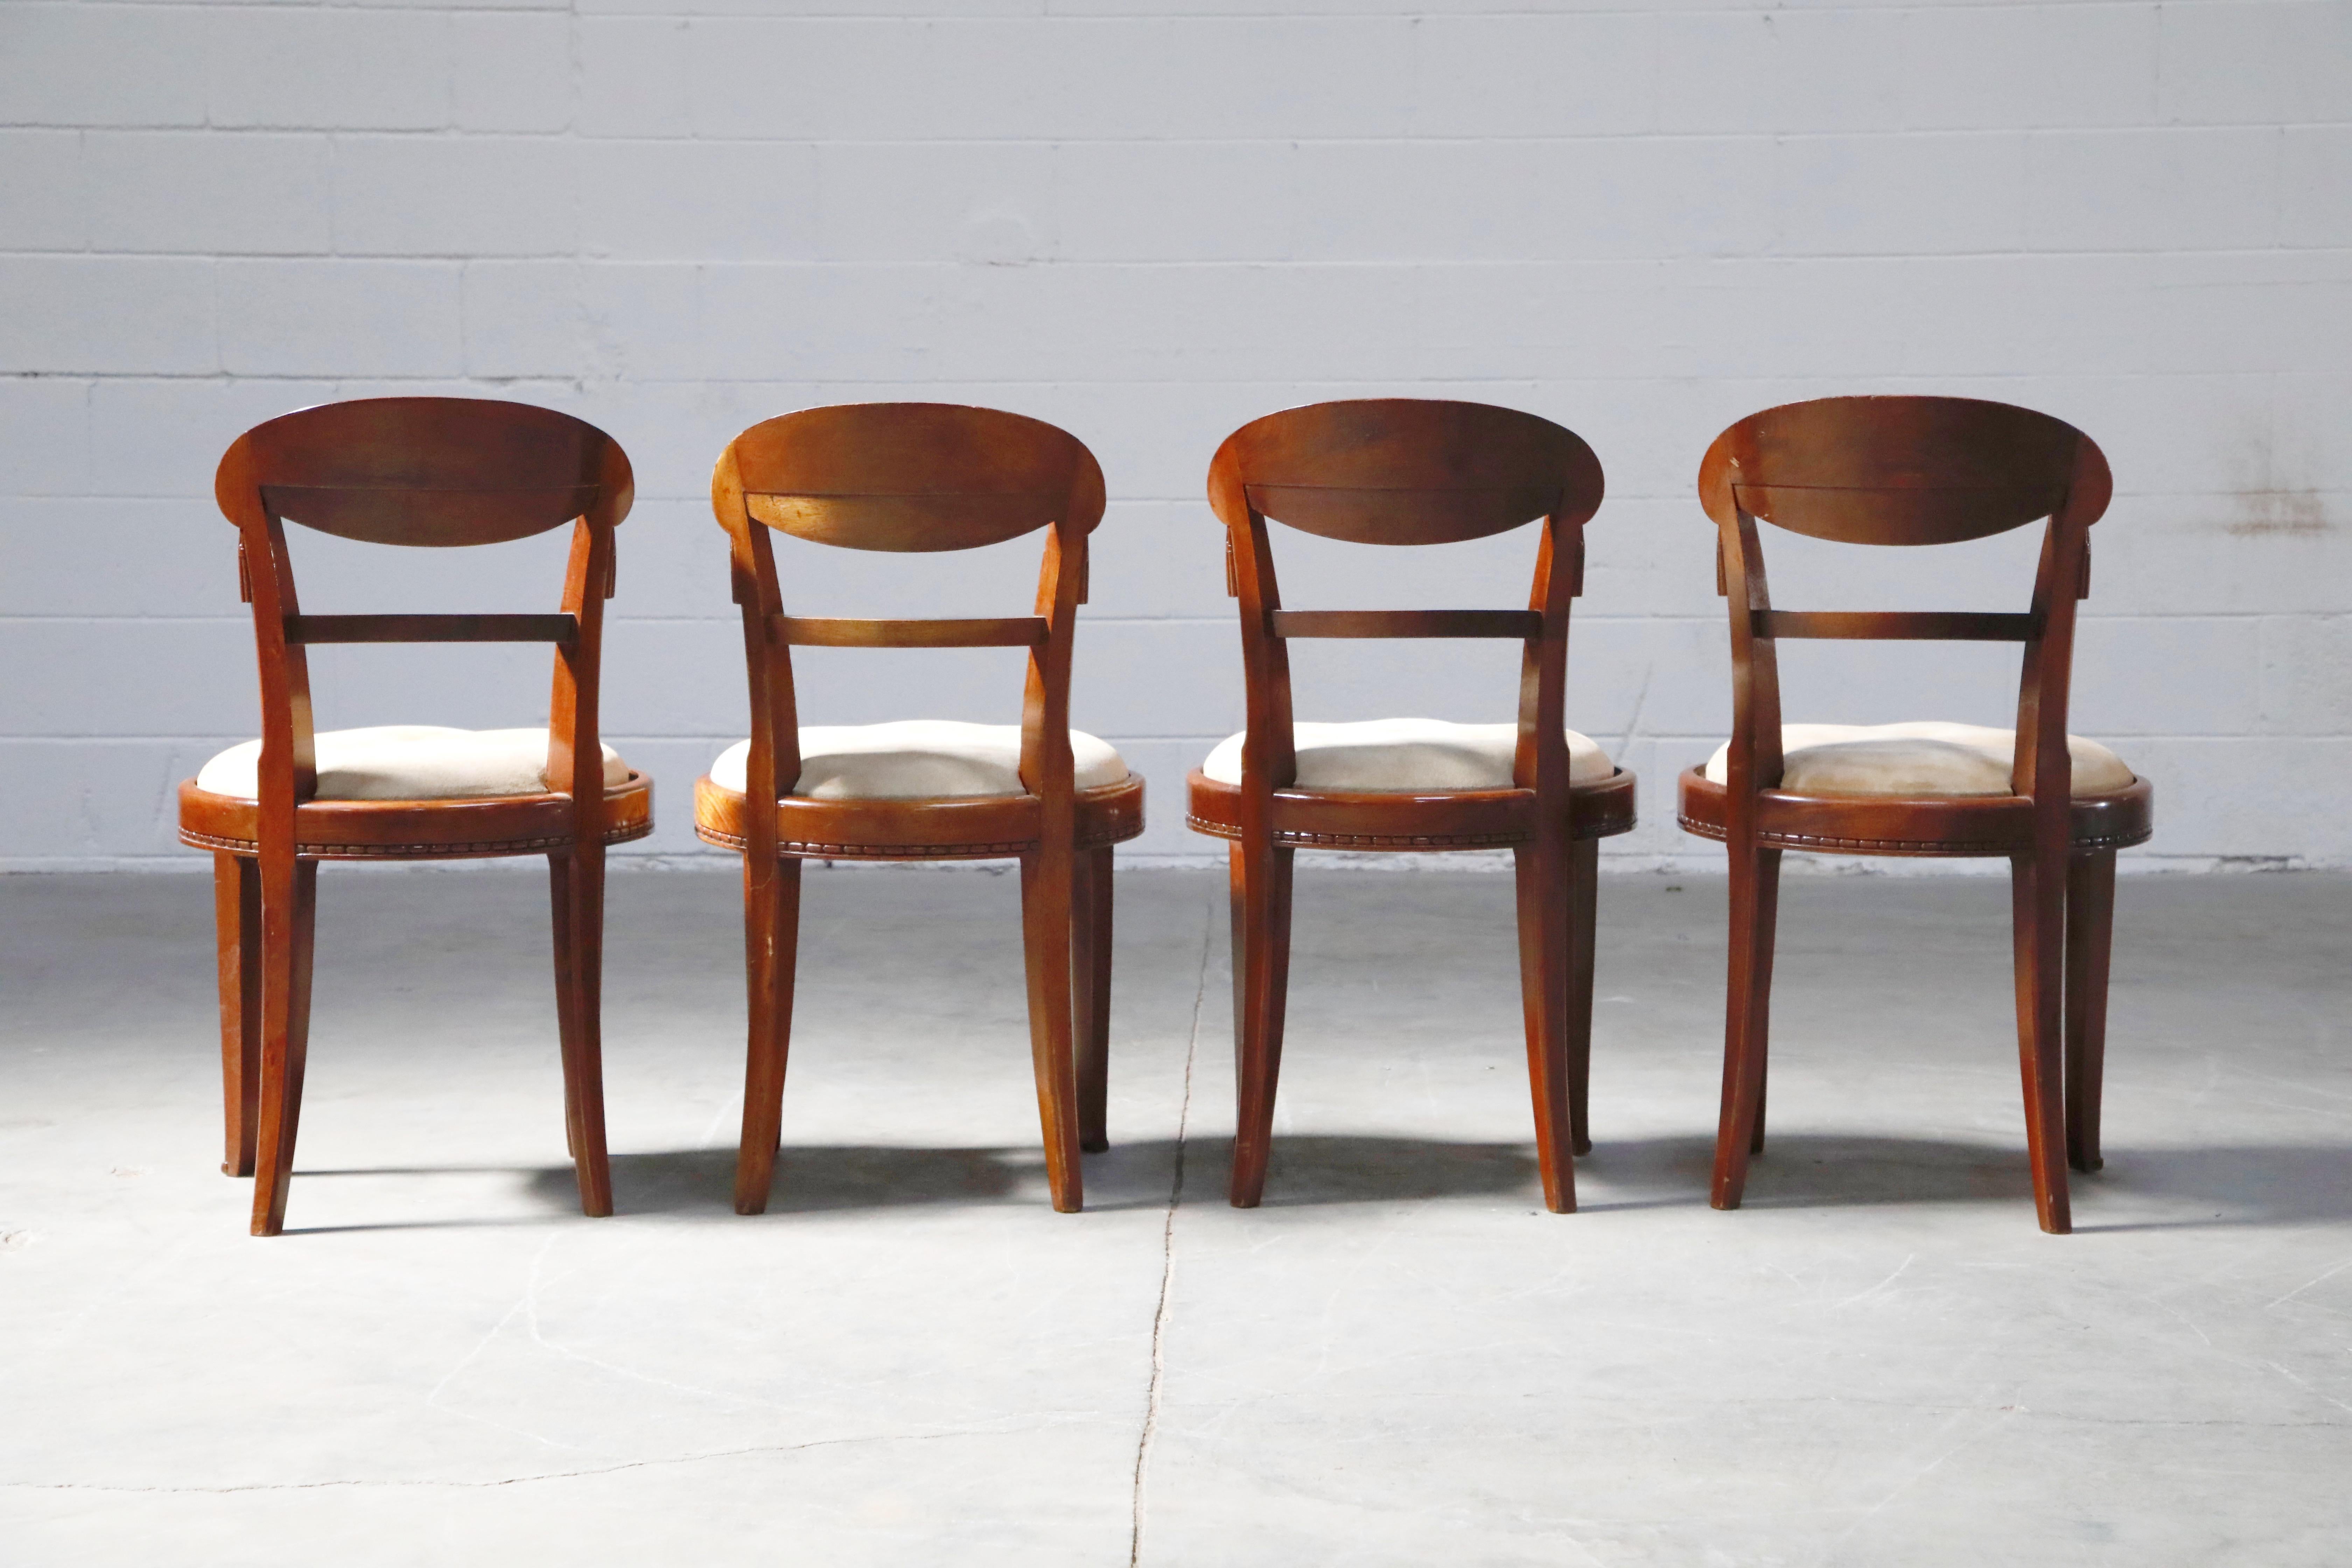 Early 20th Century Set of Four French Art Deco Dining Chairs Attributed to Sue et Mare, circa 1920s